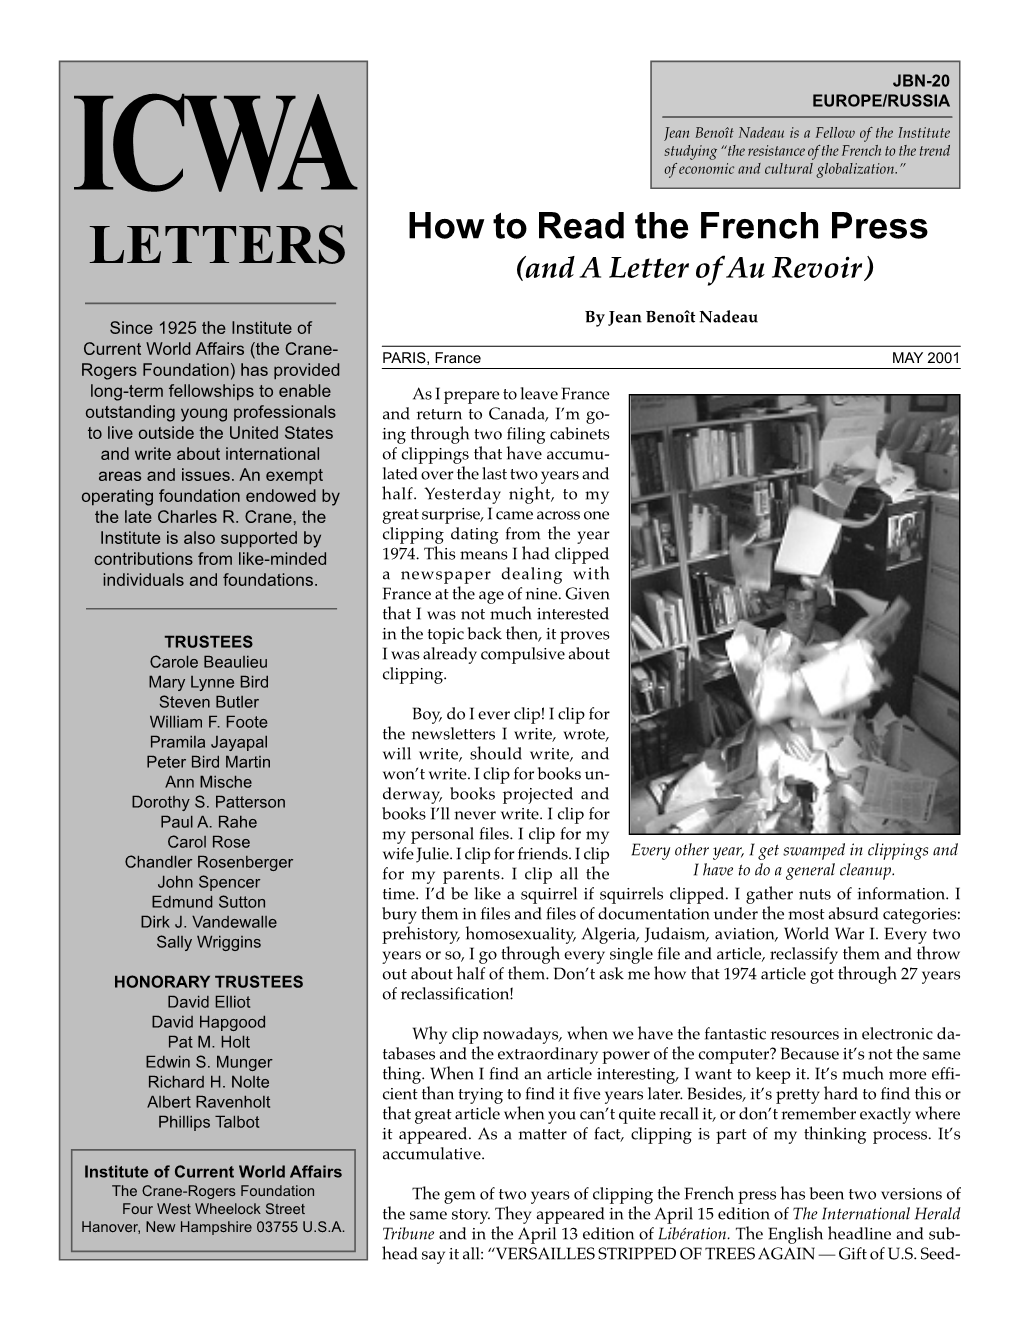 How to Read the French Press LETTERS (And a Letter of Au Revoir)